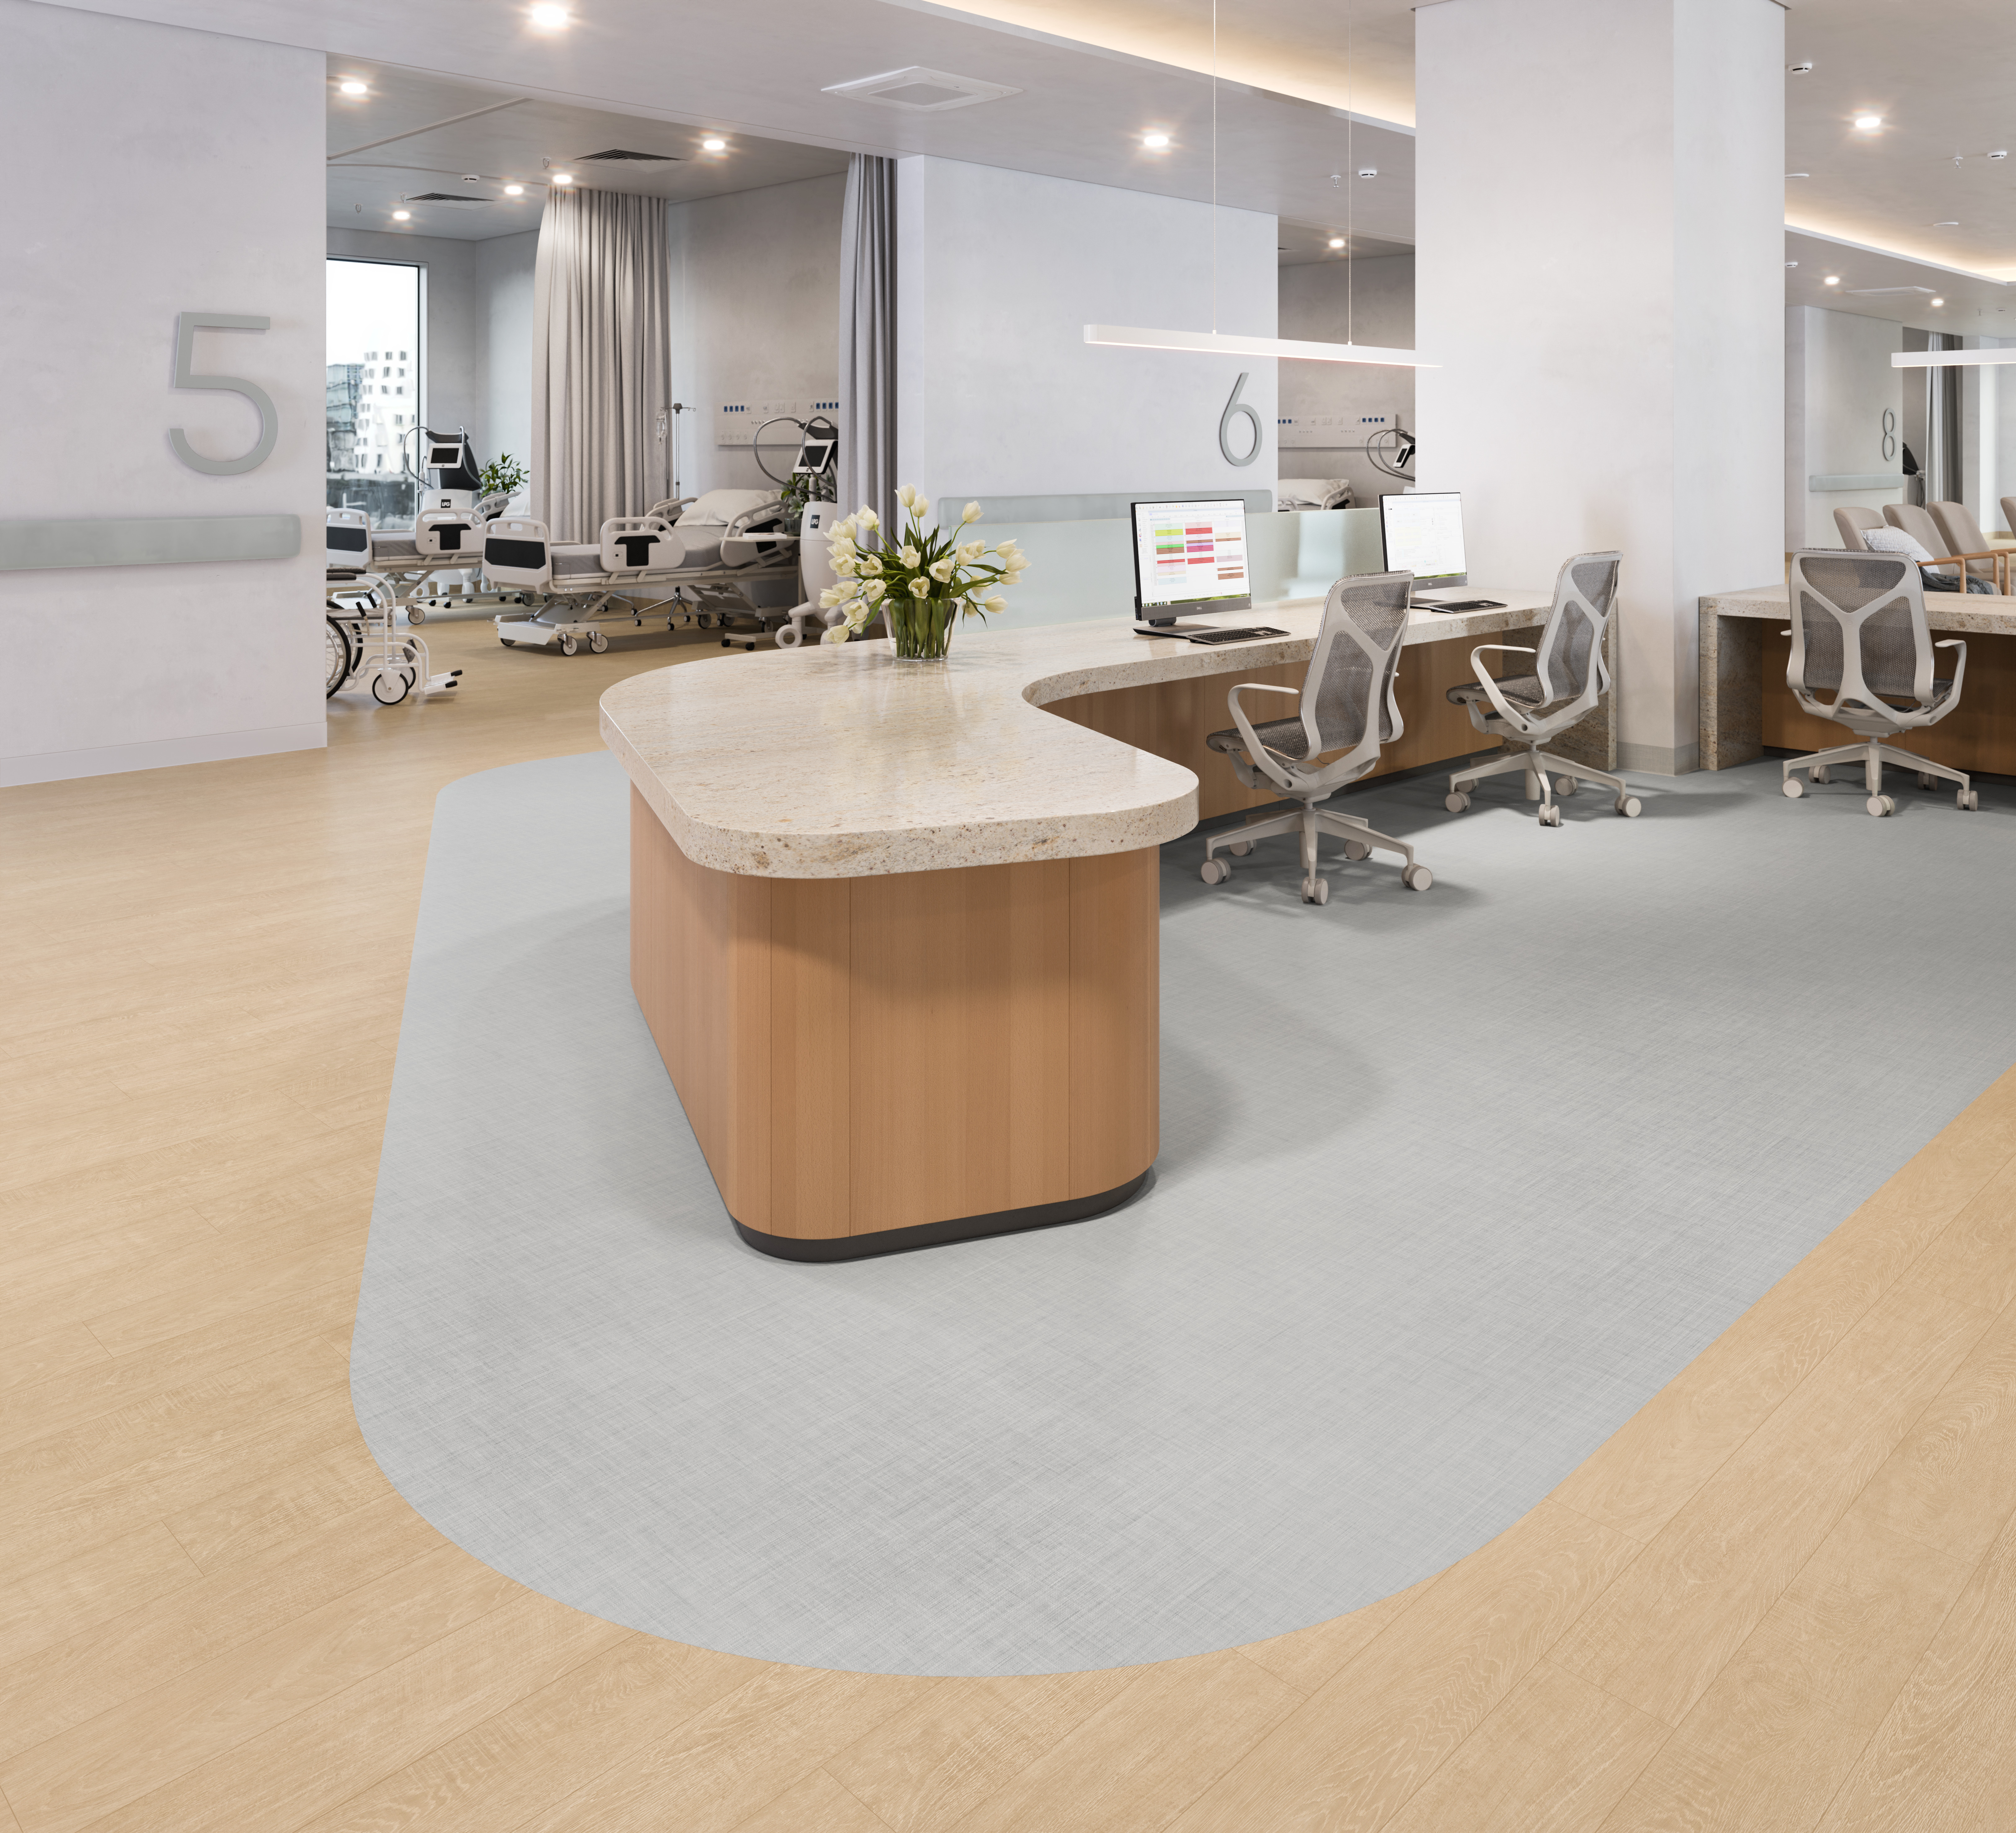 A resilient heterogeneous sheet collection developed specifically for healthcare designers, facility managers, staff and patients, Attune offers exceptional aesthetics, acoustics, comfort and durability, essential elements needed for today’s modern healthcare facilities